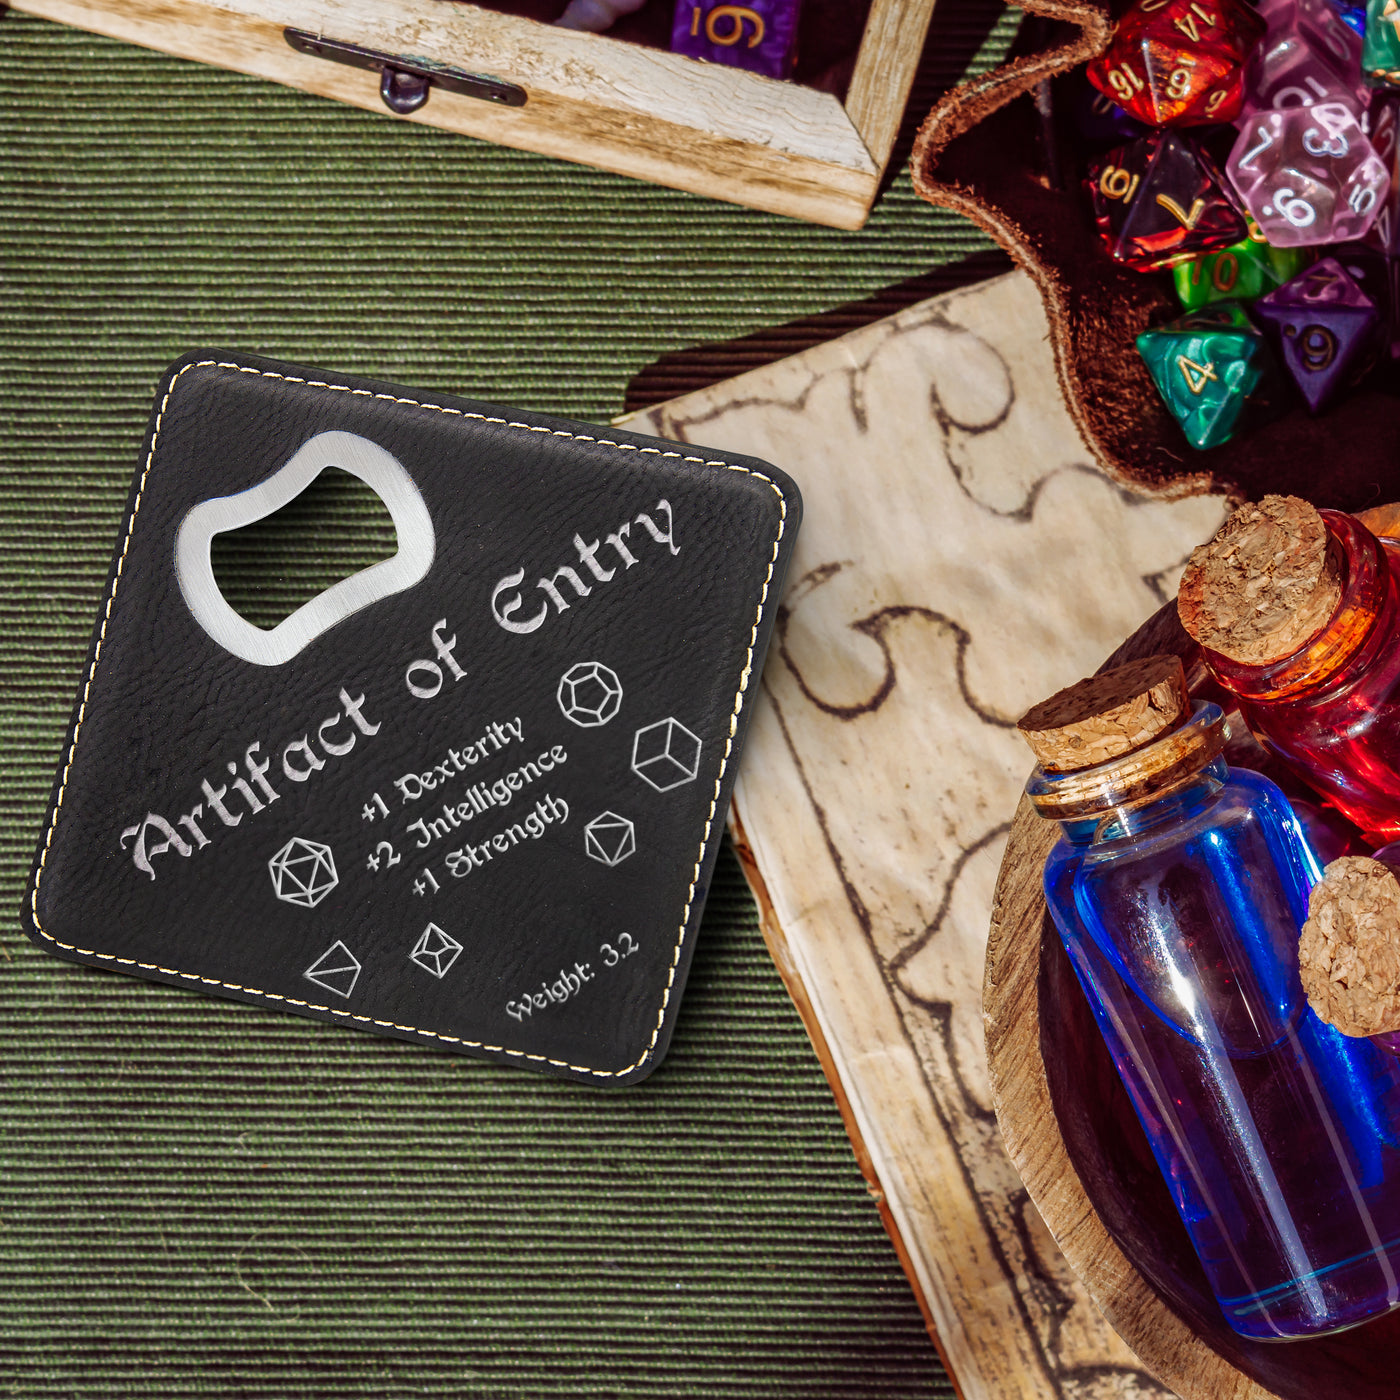 Dungeons and Dragons Artifact of Entry DnD Coaster Bottle Opener | DnD Gift for Men | Dungeon Master Gift | DnD Stuff | D&D Gifts